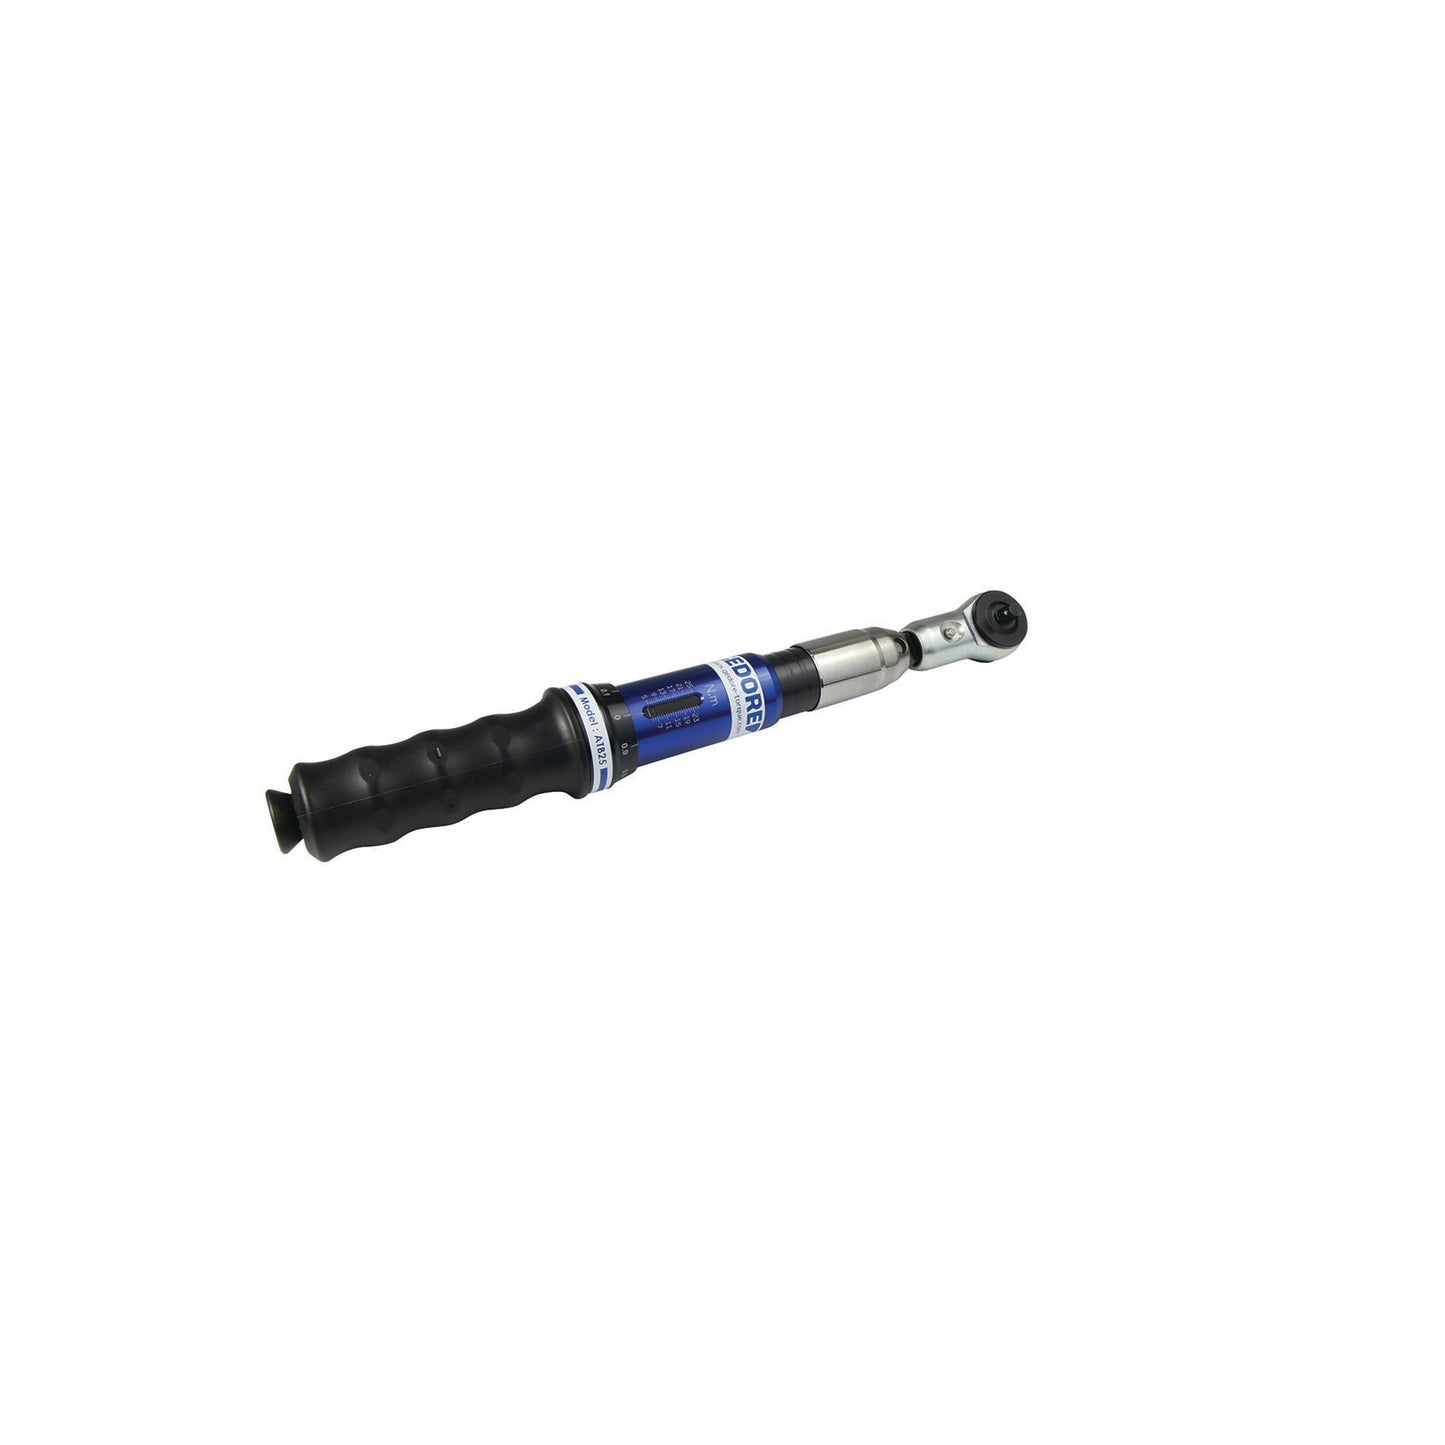 GEDORE ATB 2.5 LBF.IN - Buckling Torque Wrench LBF.IN Z 8 050525 (2282577)